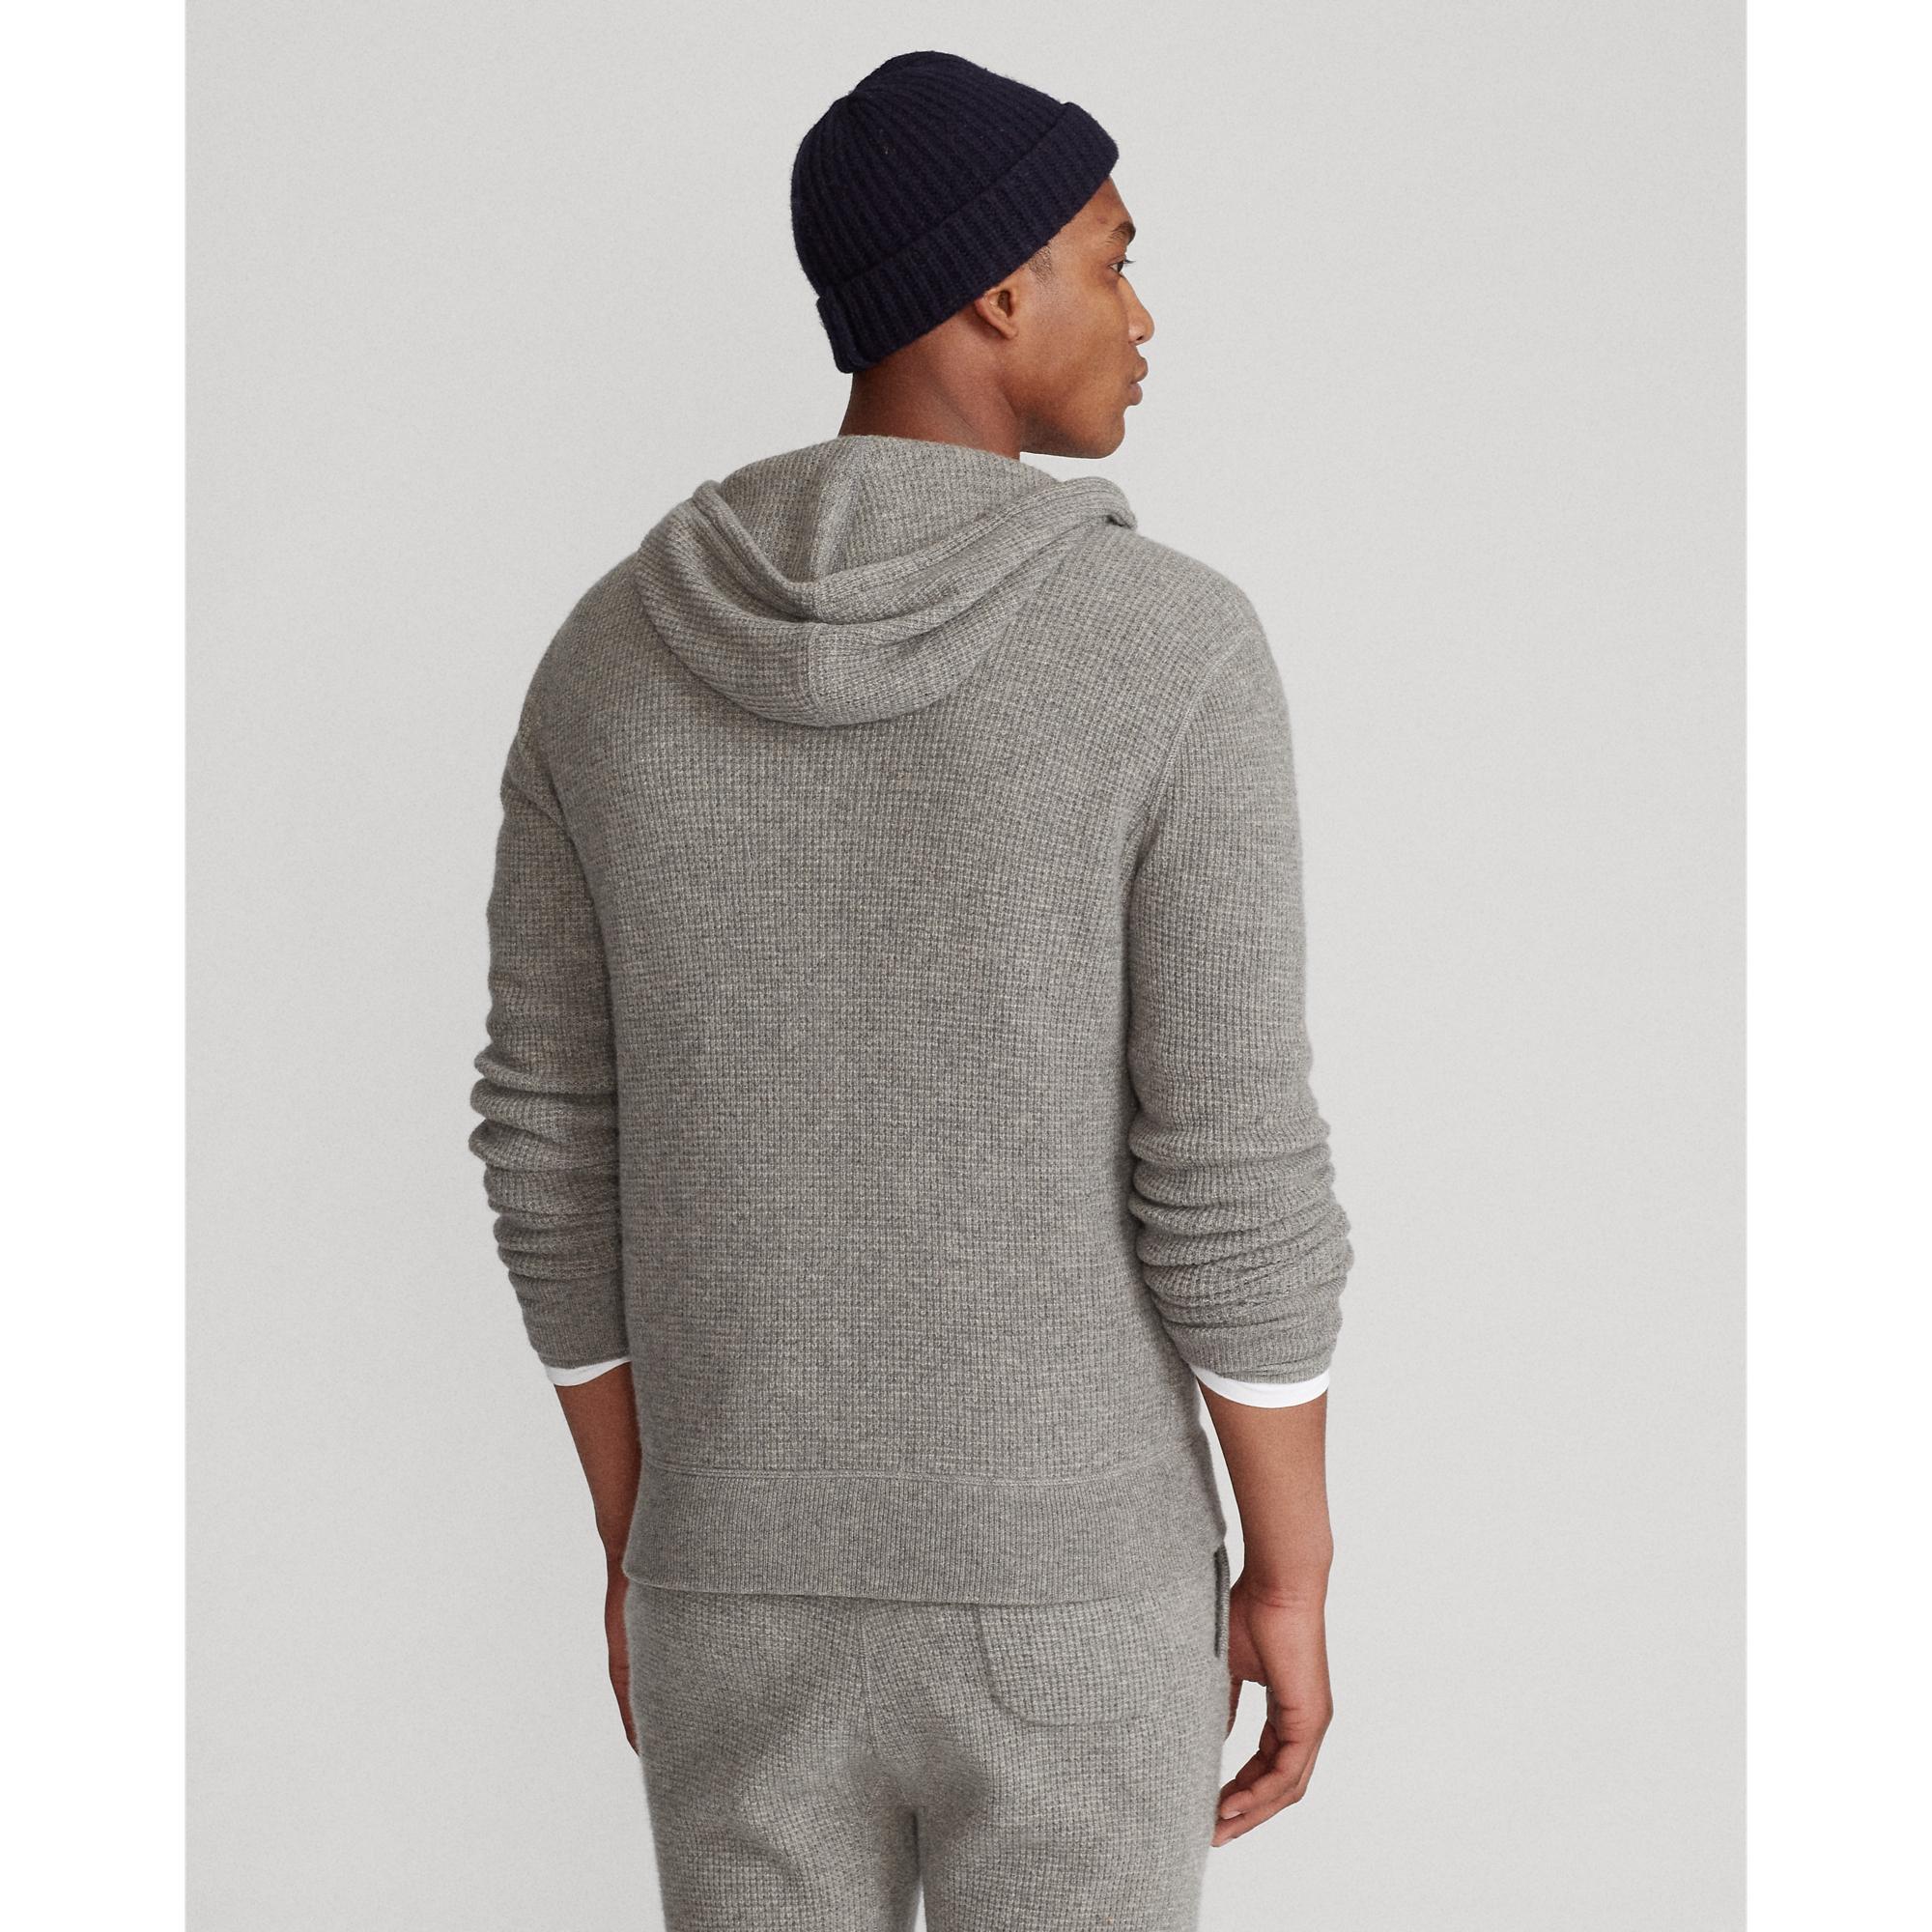 Polo Ralph Lauren Washable Cashmere Hooded Jumper in Gray for Men - Lyst